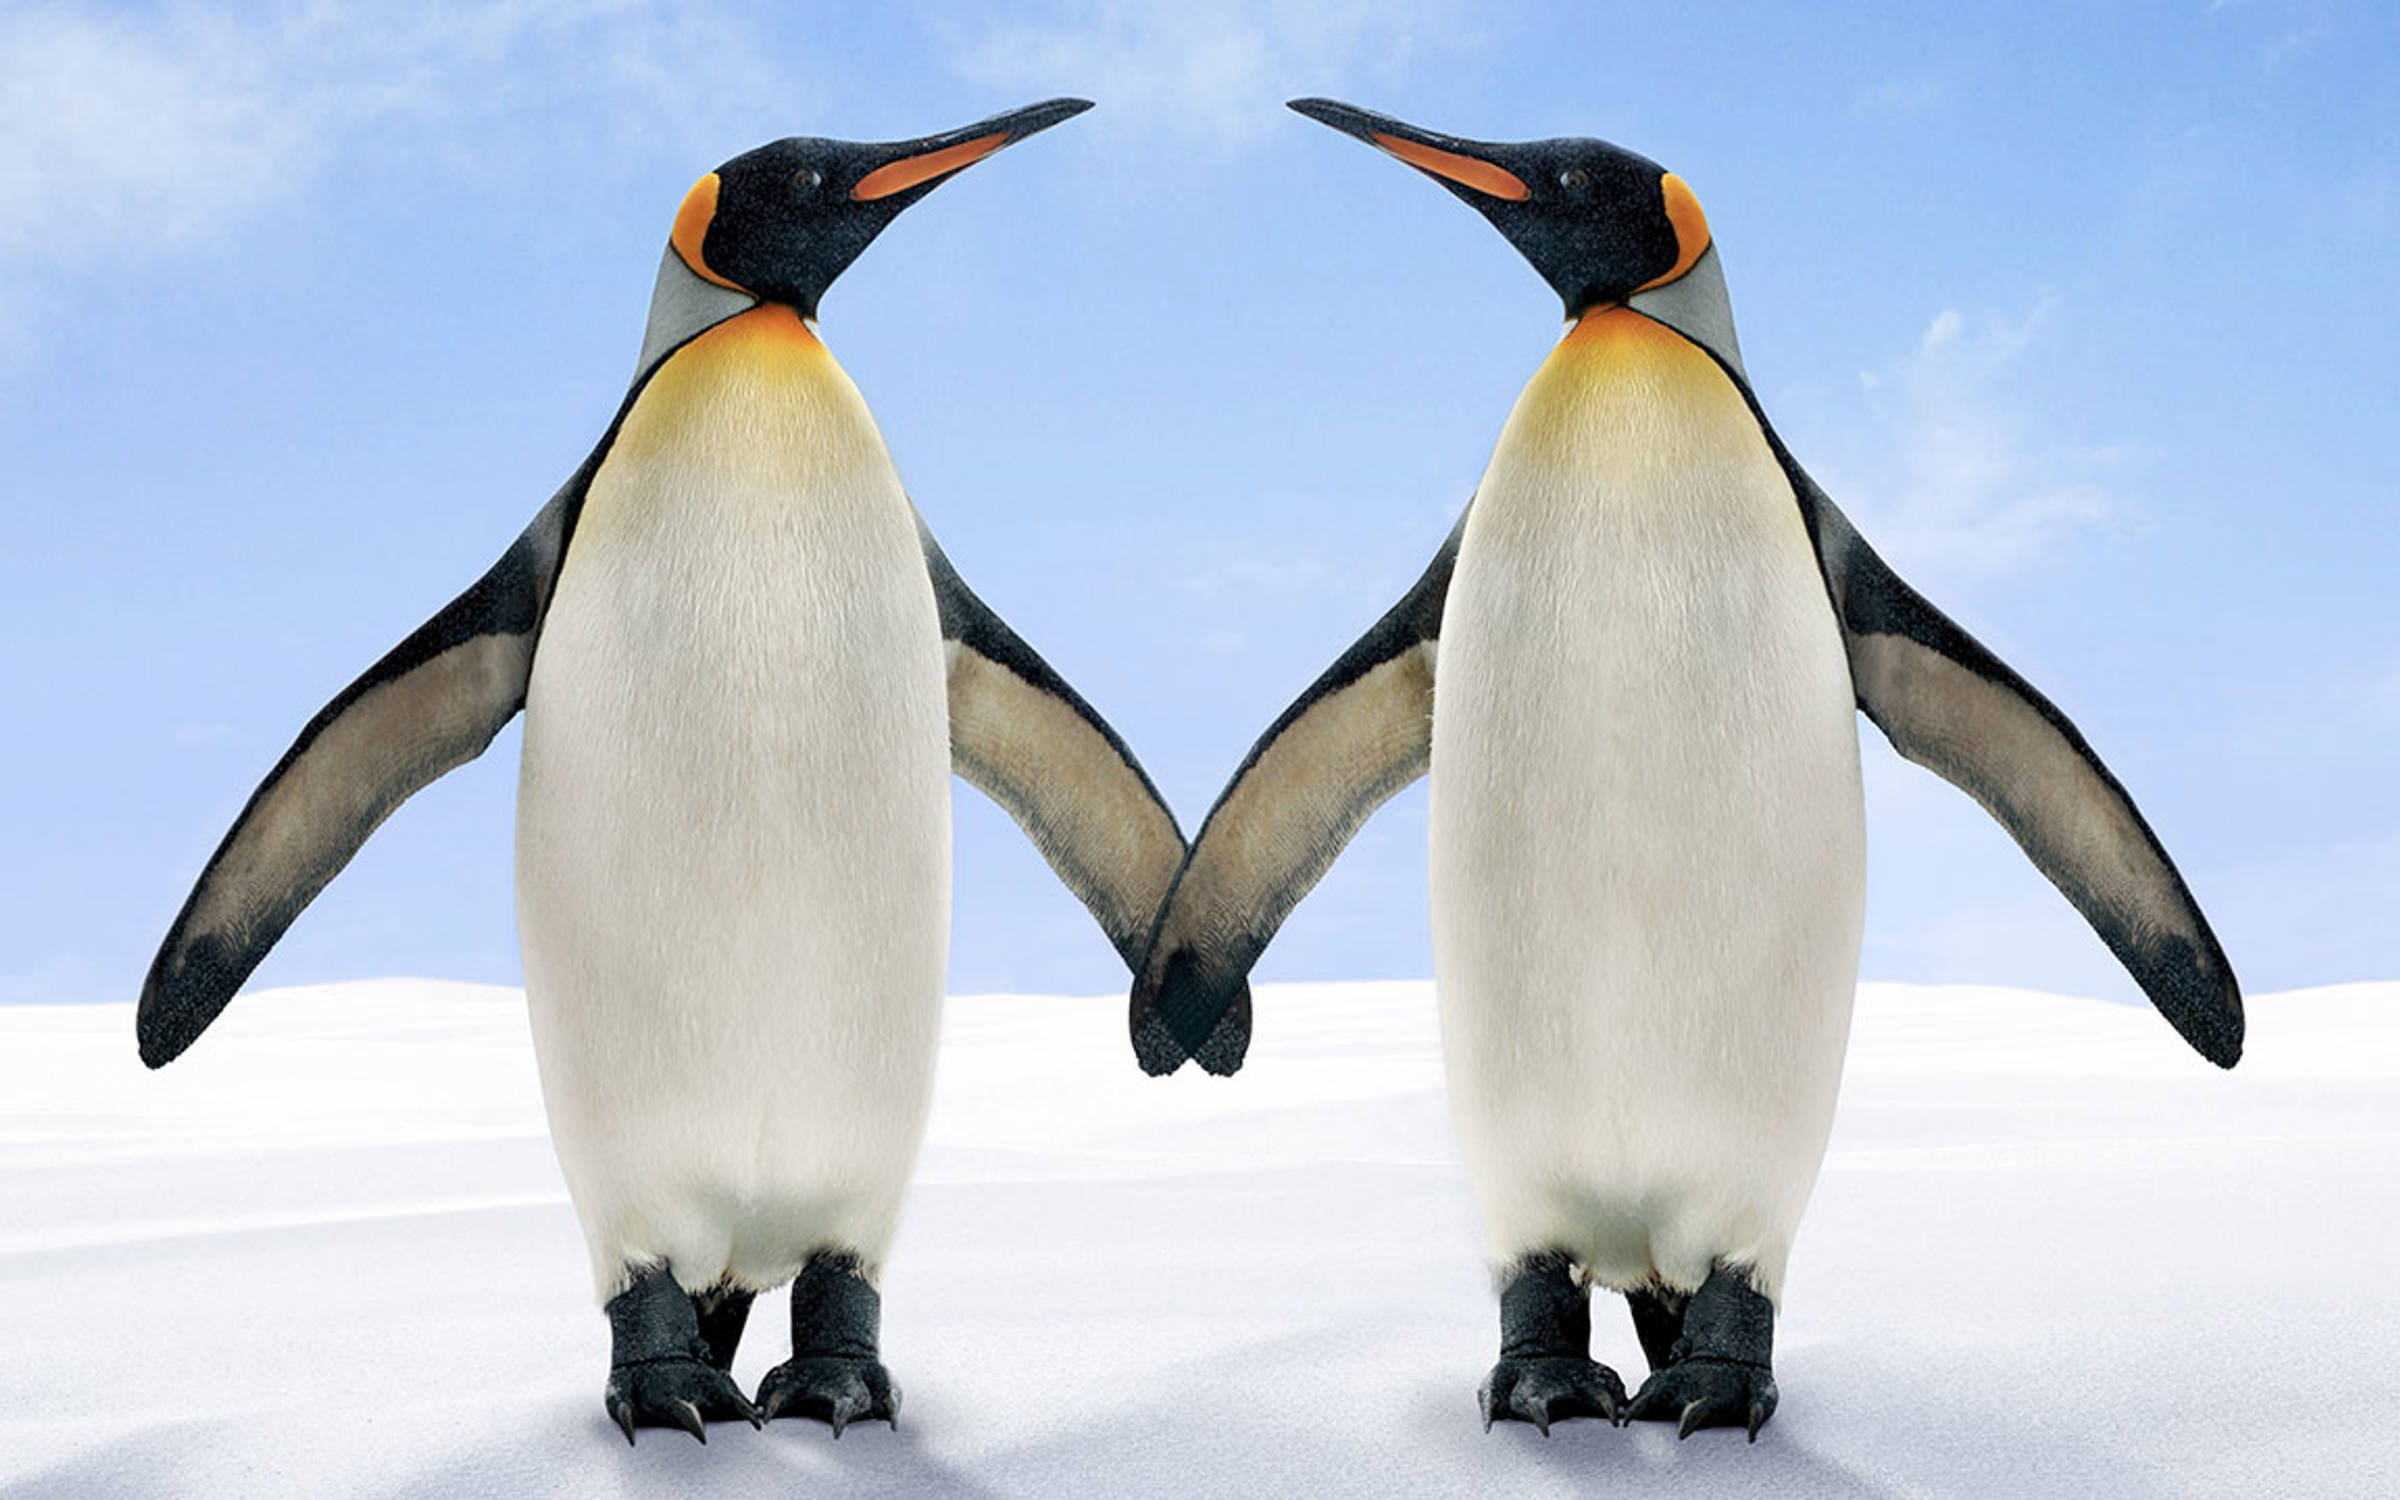 Respect - Two penguins reaching out wings to each other